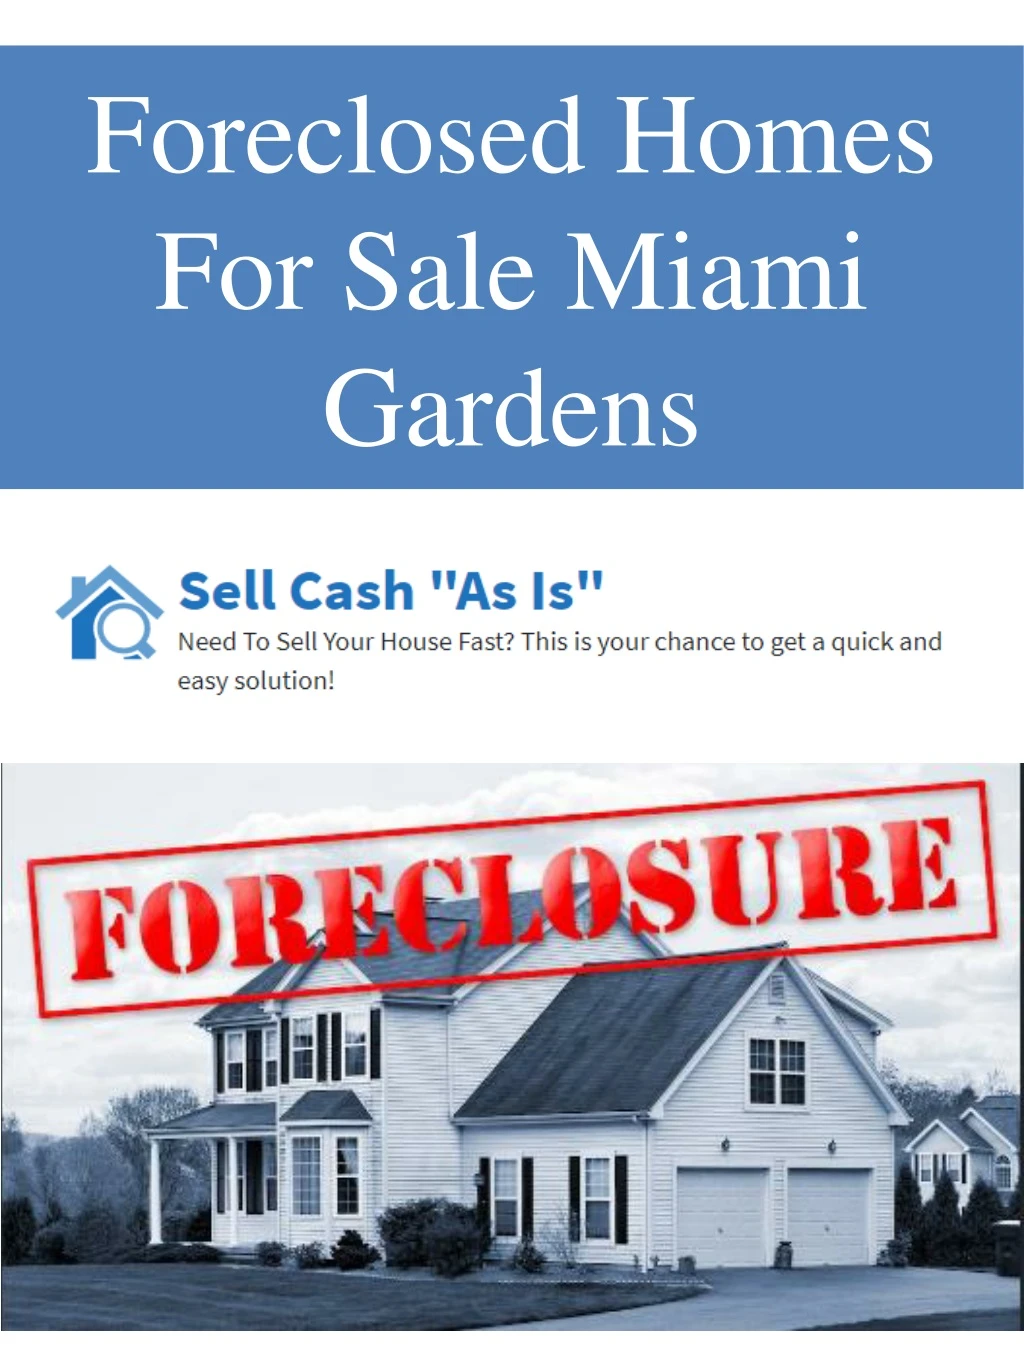 foreclosed homes for sale miami gardens